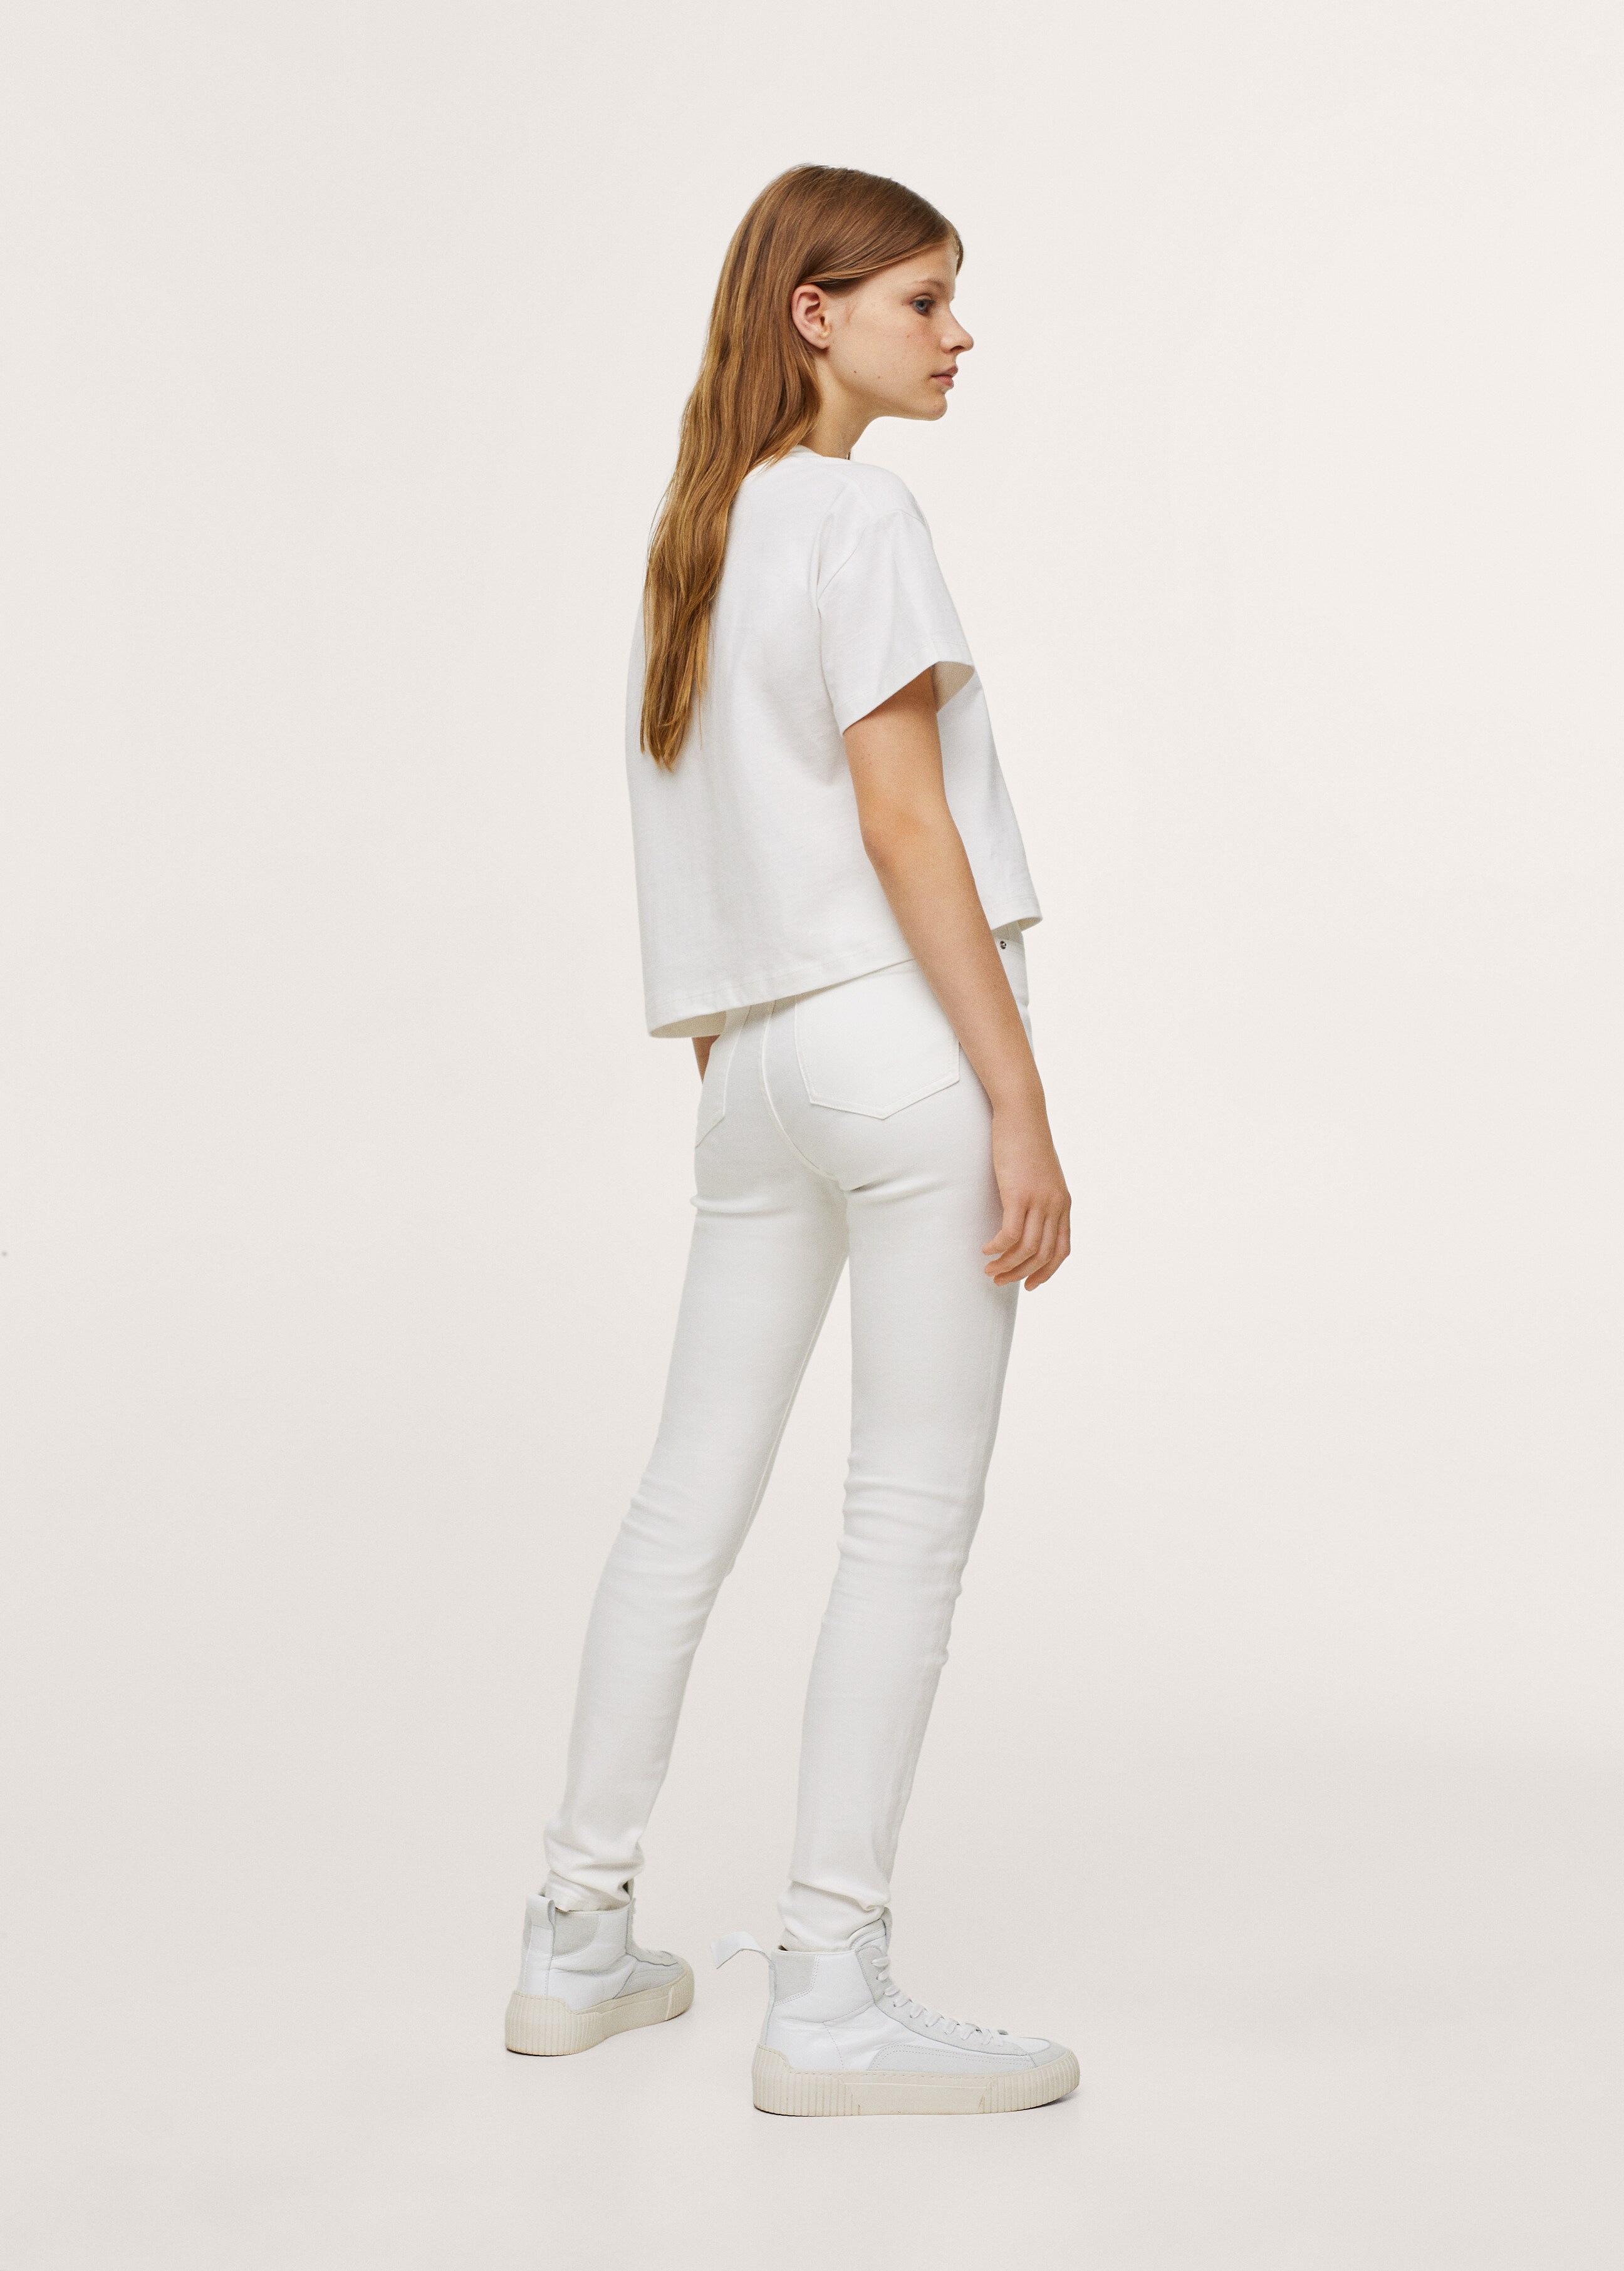 Skinny jeans - Details of the article 4